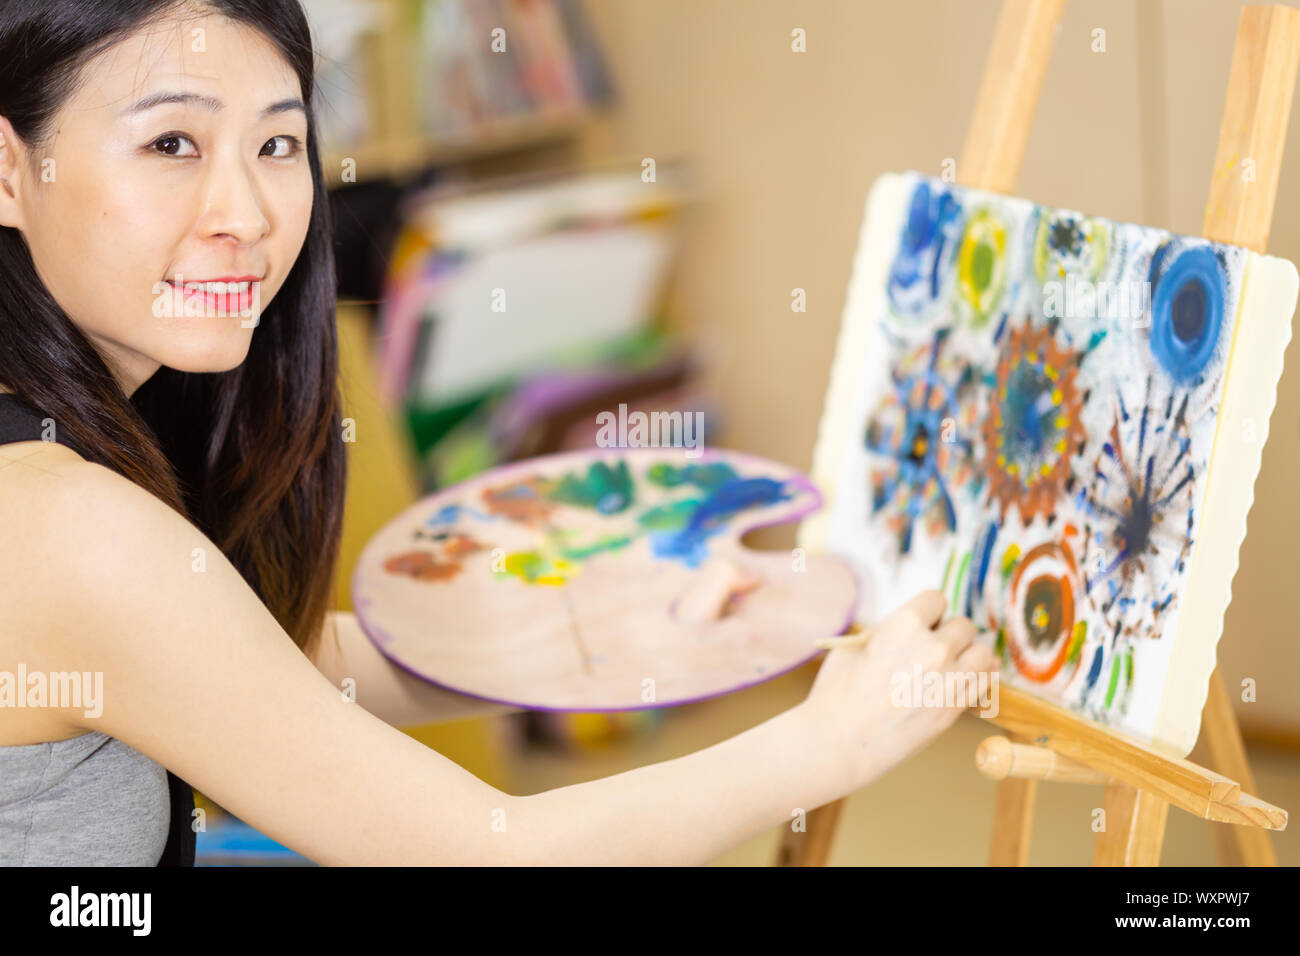 Artist painting oil painting on an easel Stock Photo